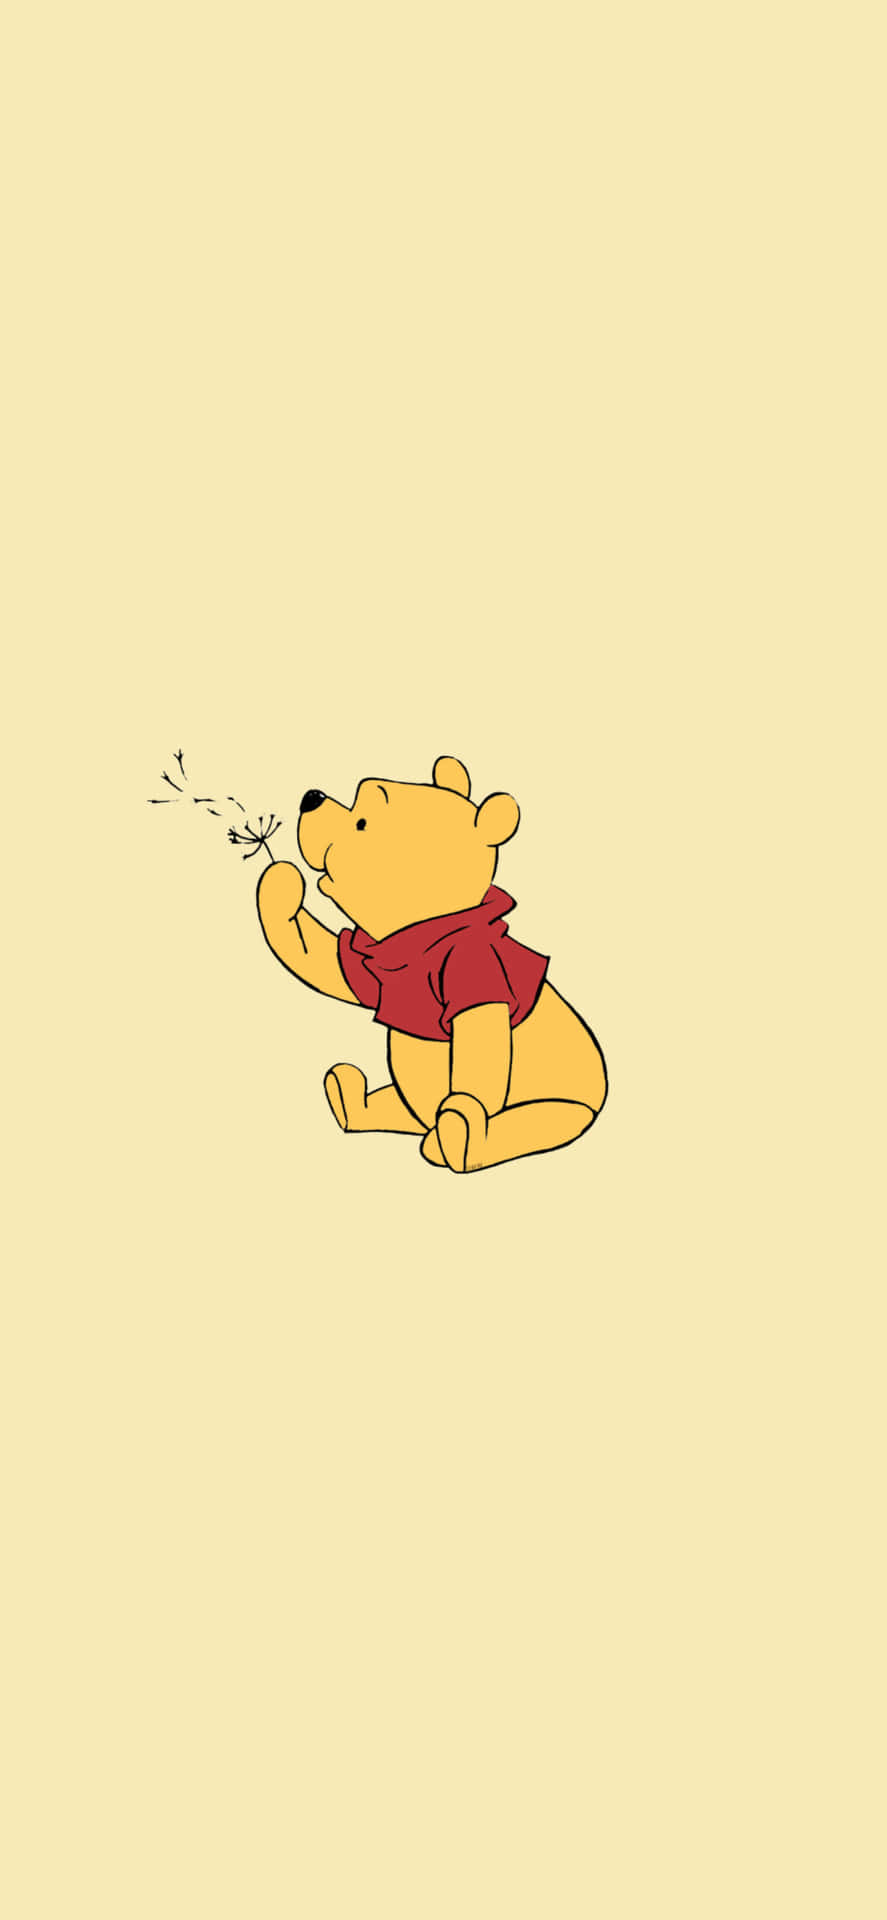 The Classic, Endearing Aesthetics of Winnie The Pooh Wallpaper